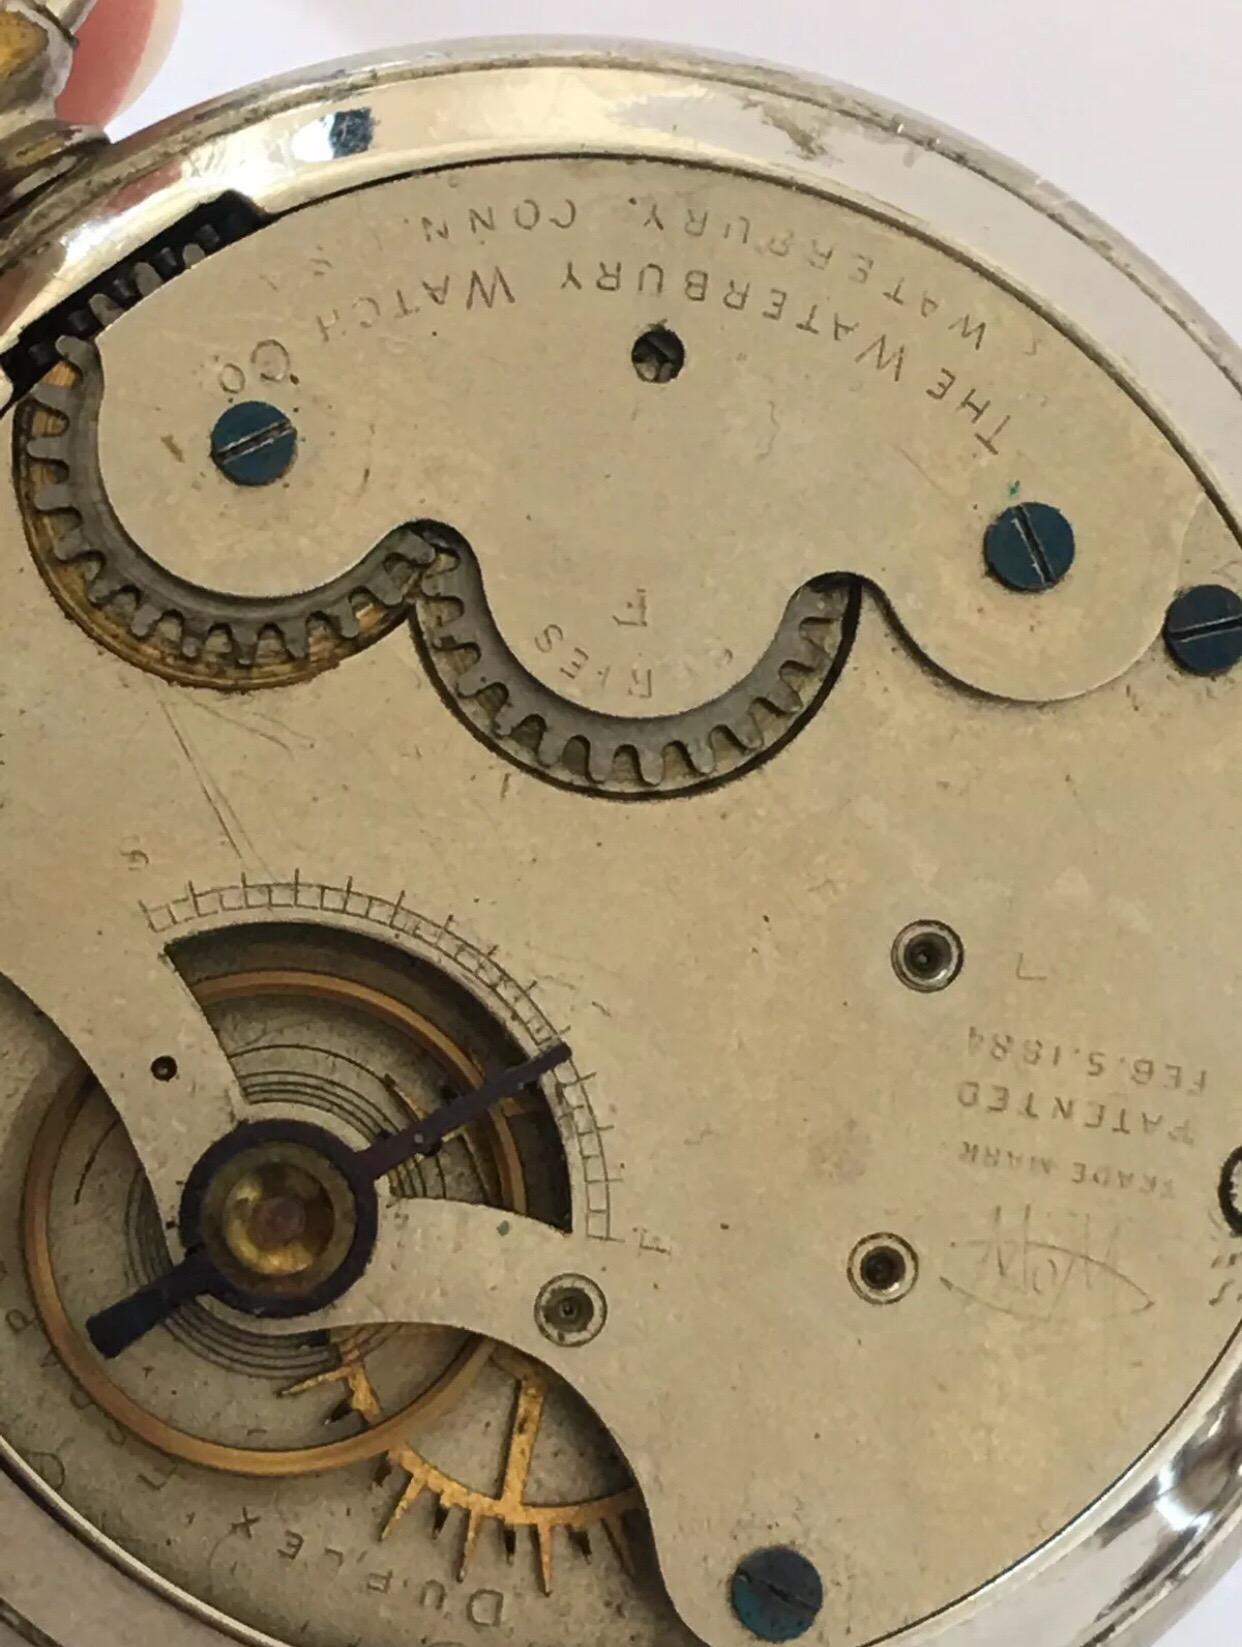 Antique Duplex Escapement Pocket Watch Signed The Waterbury Watch Co. In Fair Condition For Sale In Carlisle, GB